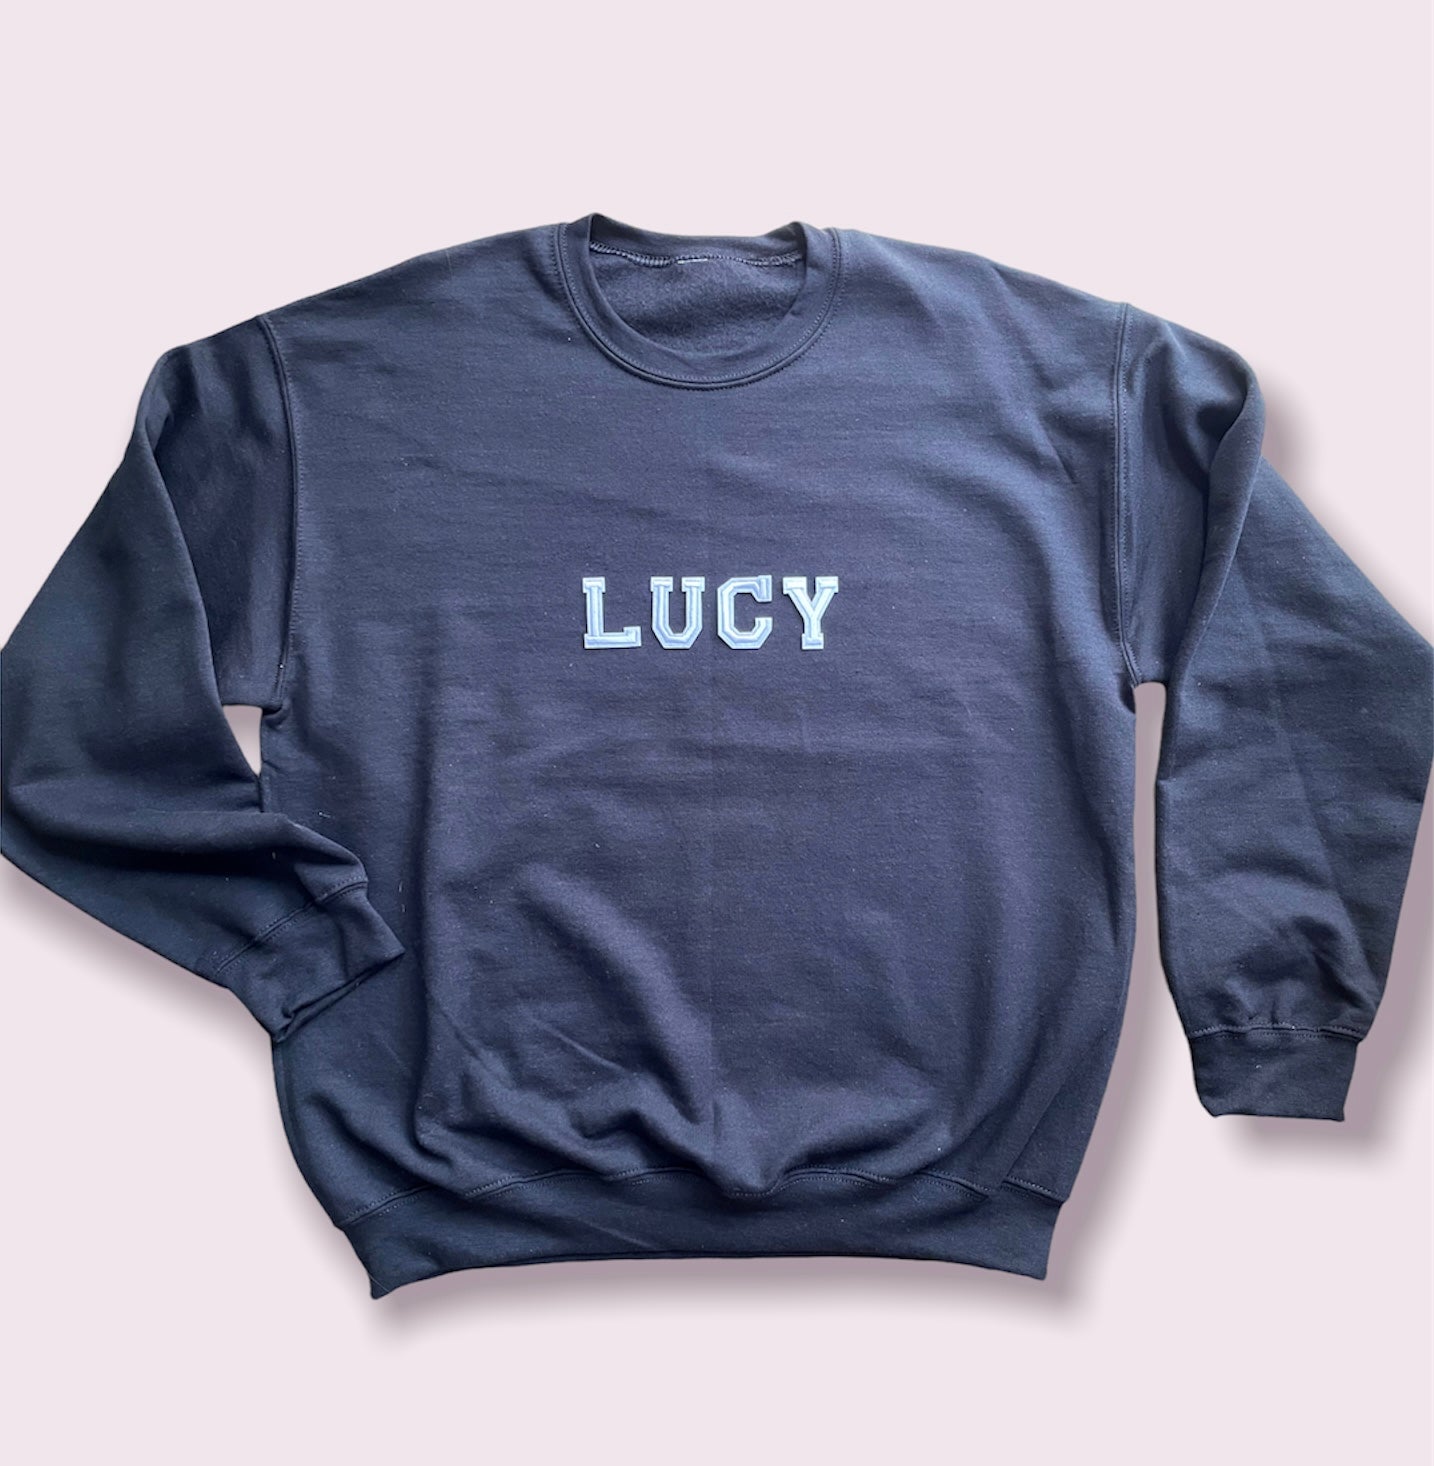 Customizable embroidered patches sweatshirt